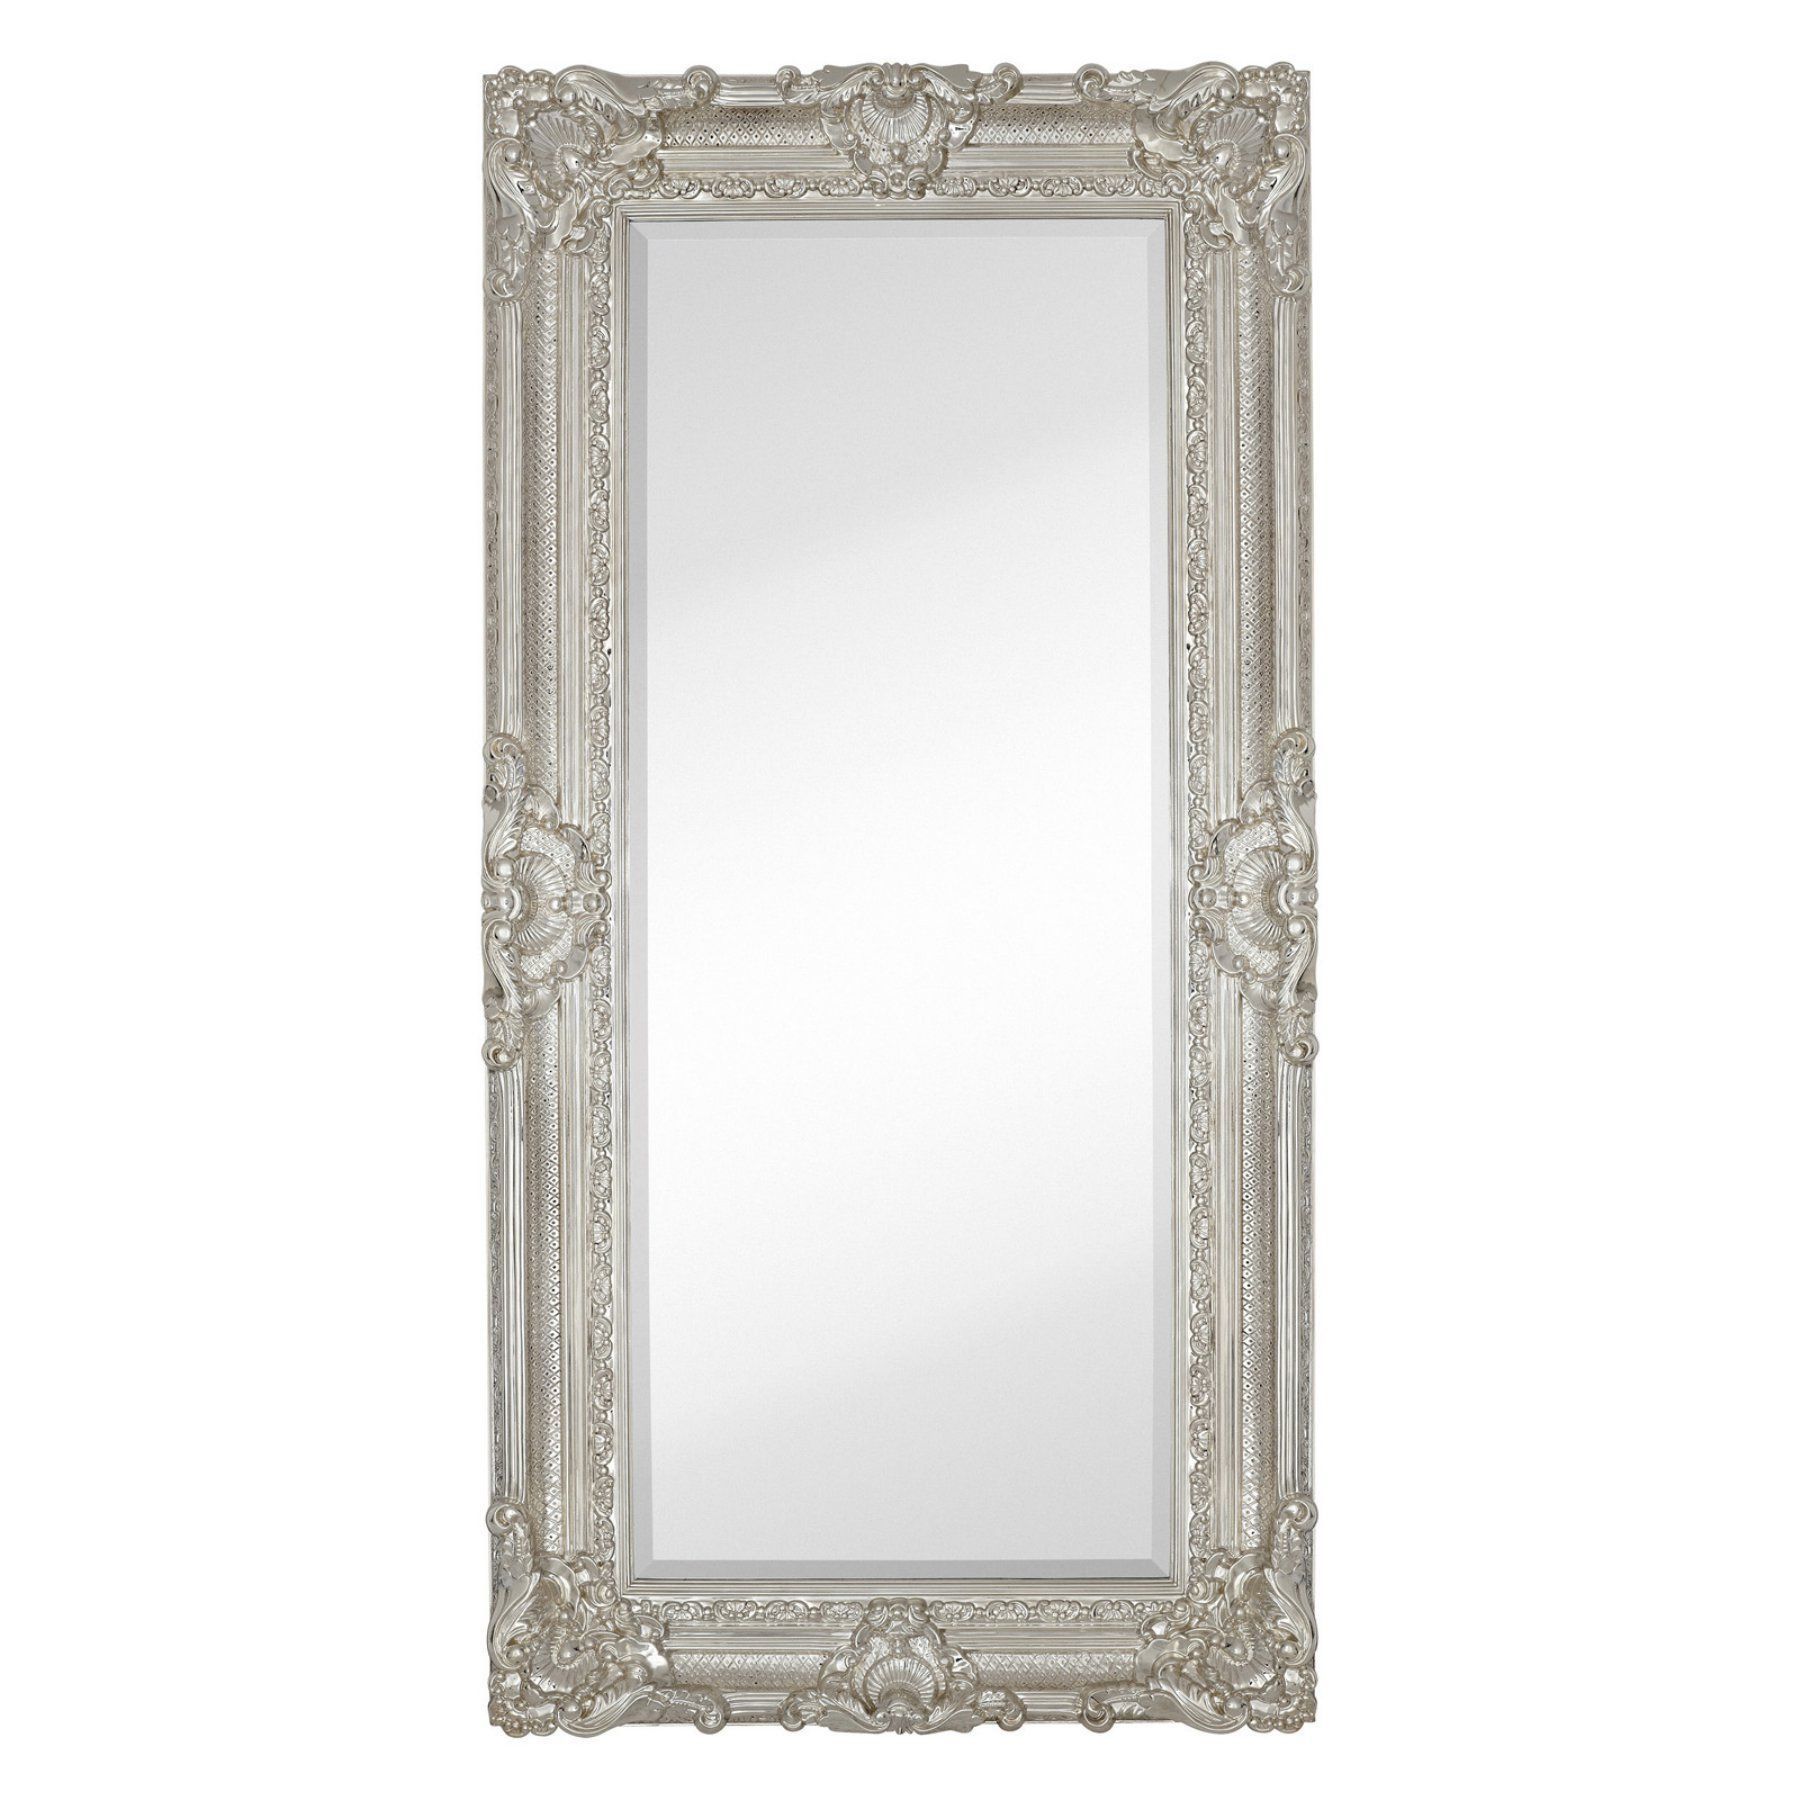 Majestic Large Rectangular Beveled Glass Framed Wall Mirror For Eriq Framed Wall Mirrors (View 3 of 20)